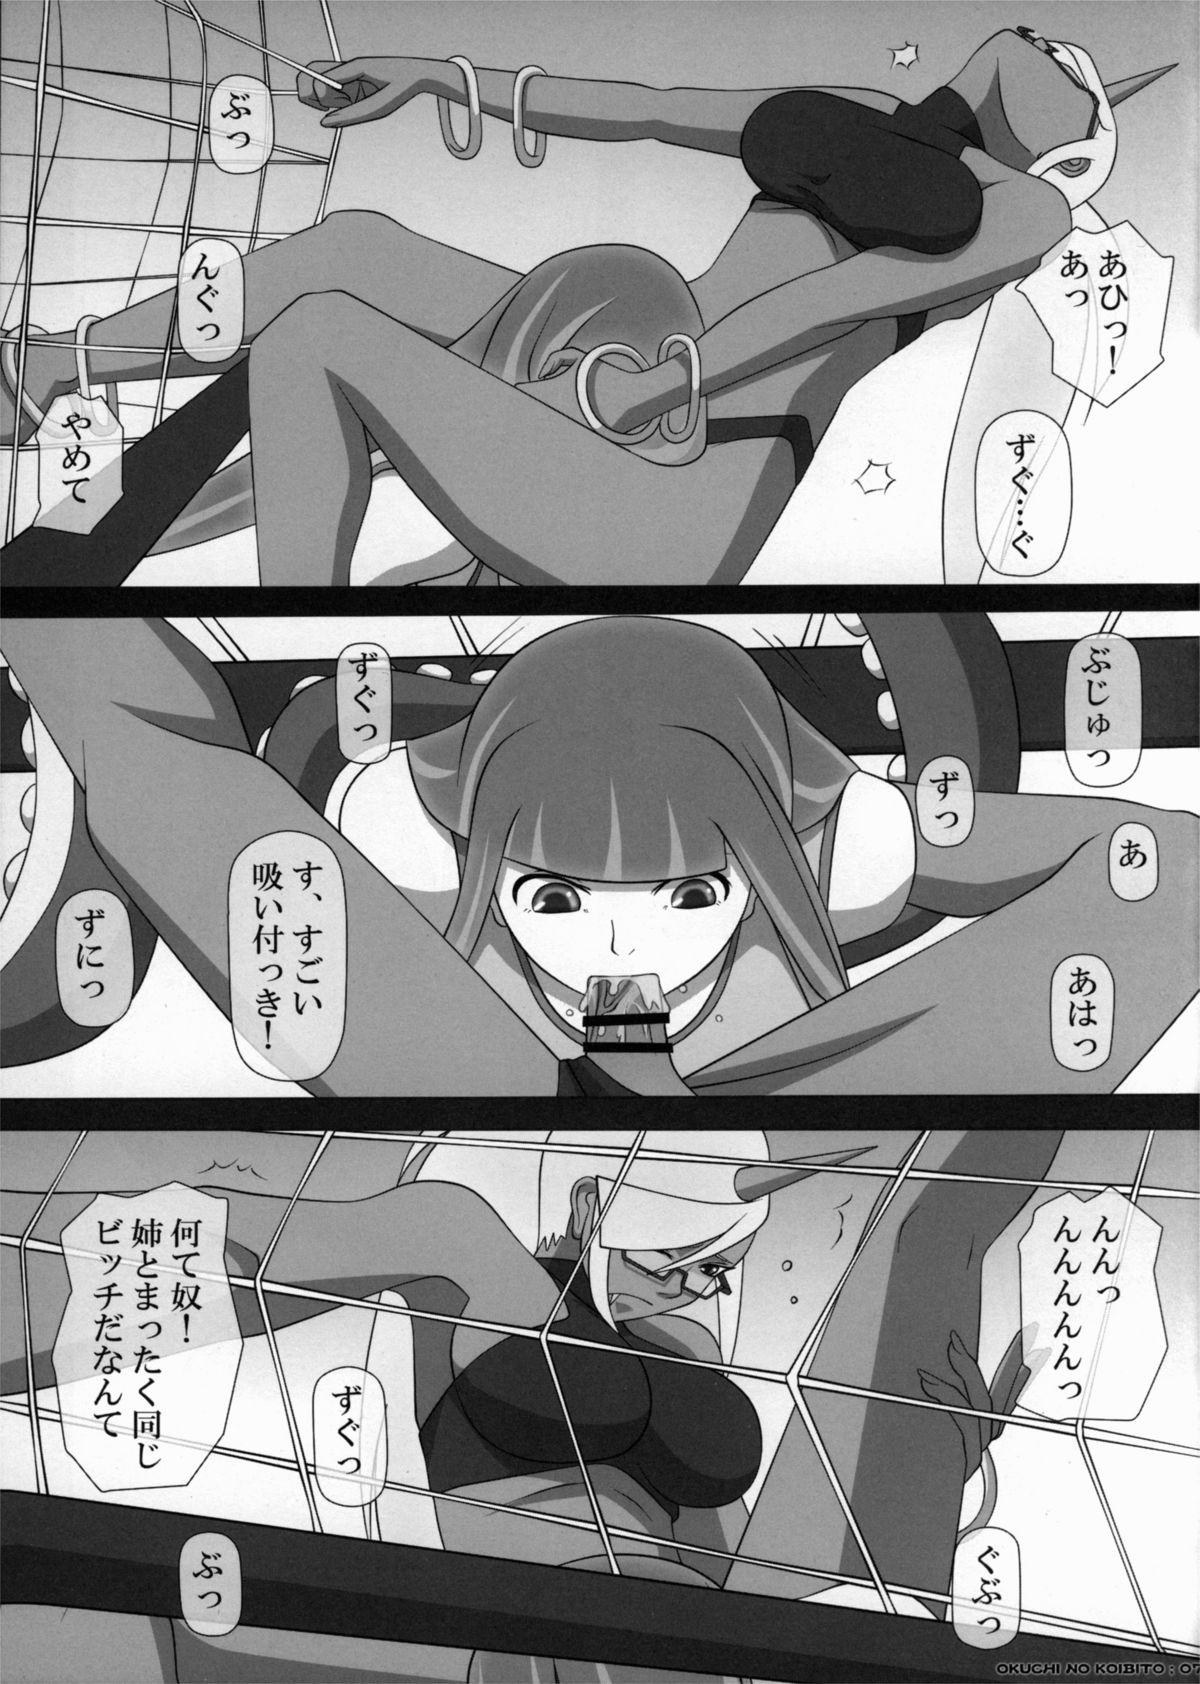 Gaygroupsex SWEET HOLE - Panty and stocking with garterbelt Face Fuck - Page 7